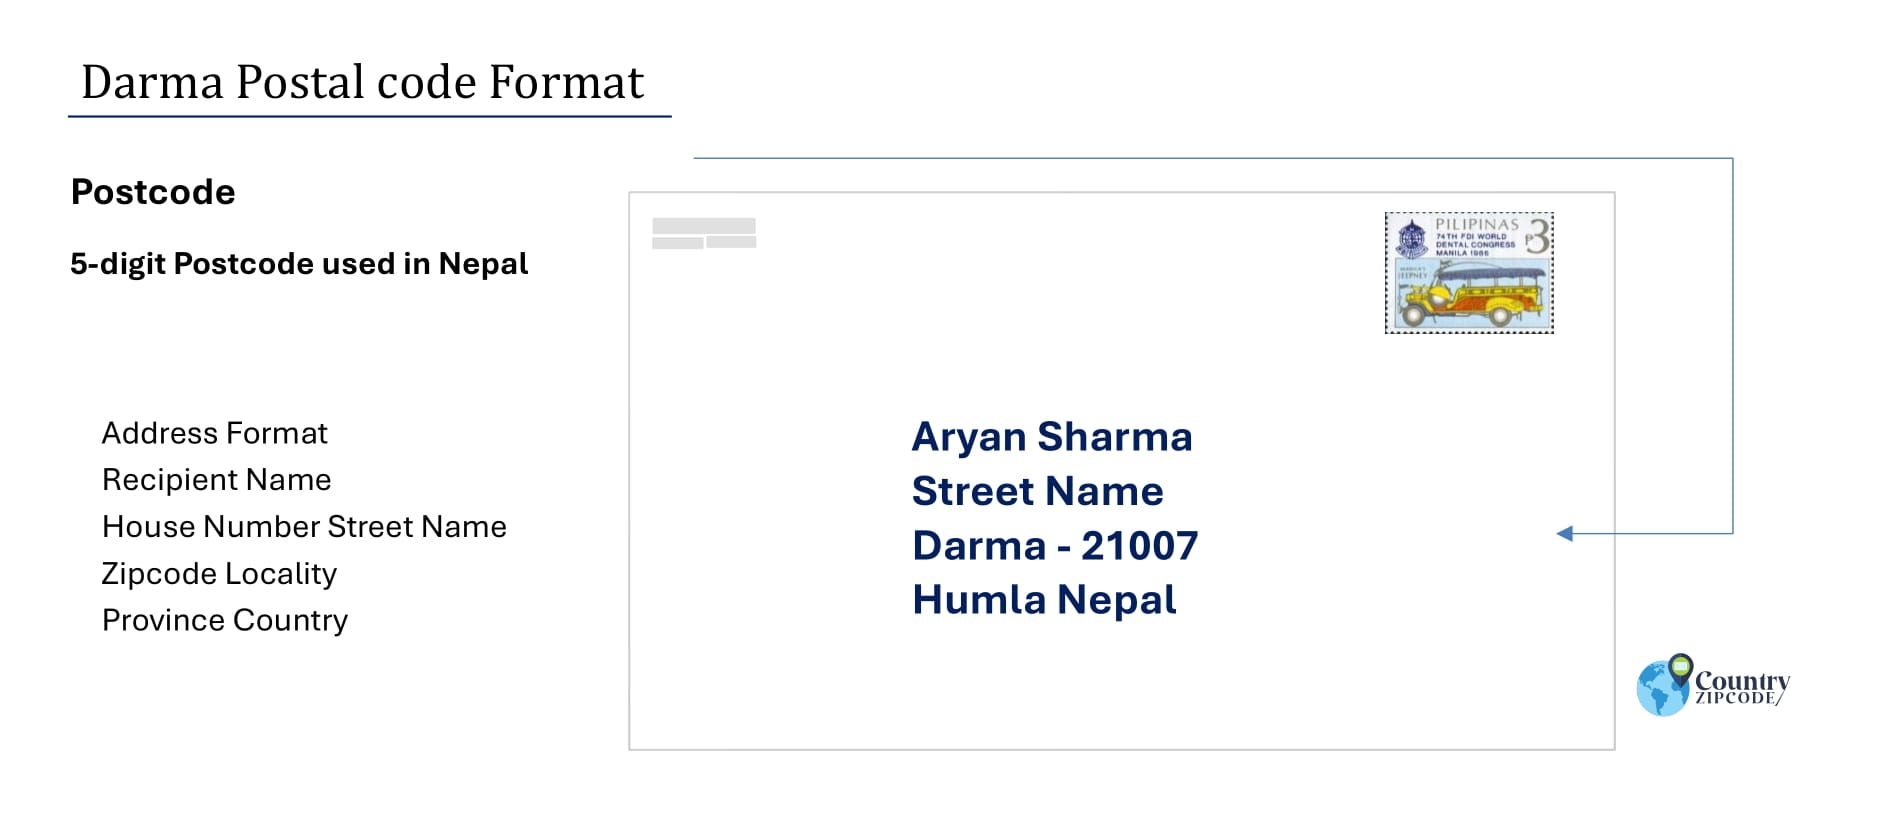 example of Darma Nepal Postal code and address format